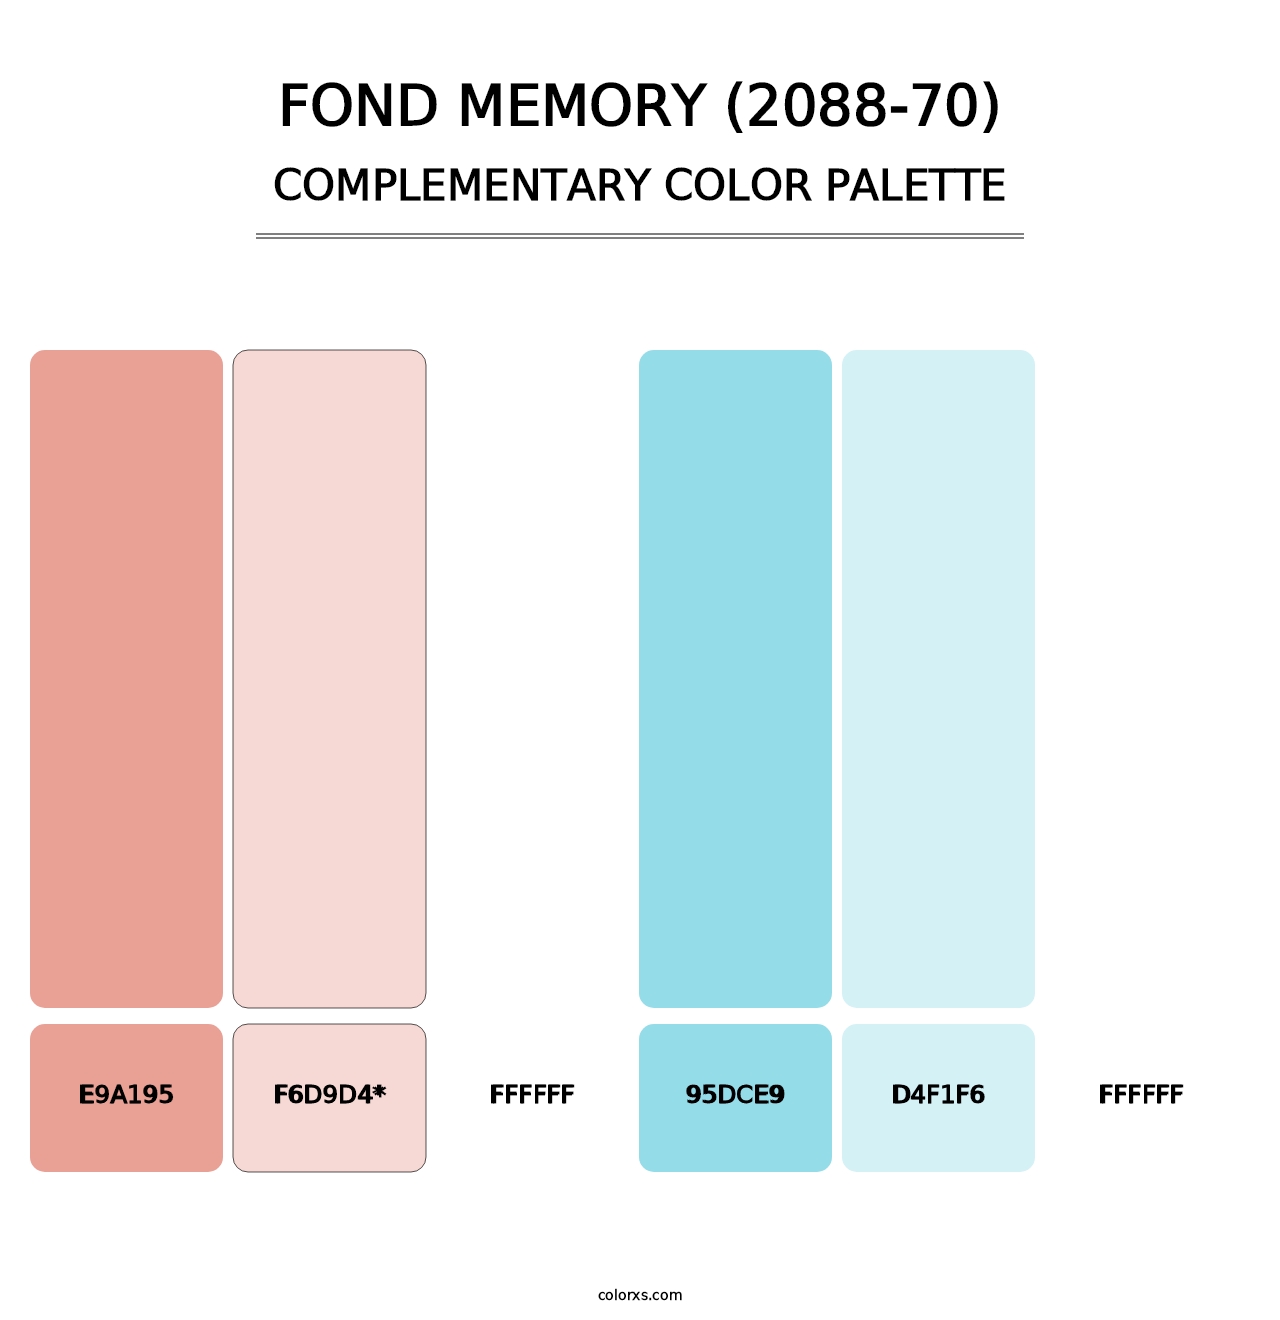 Fond Memory (2088-70) - Complementary Color Palette